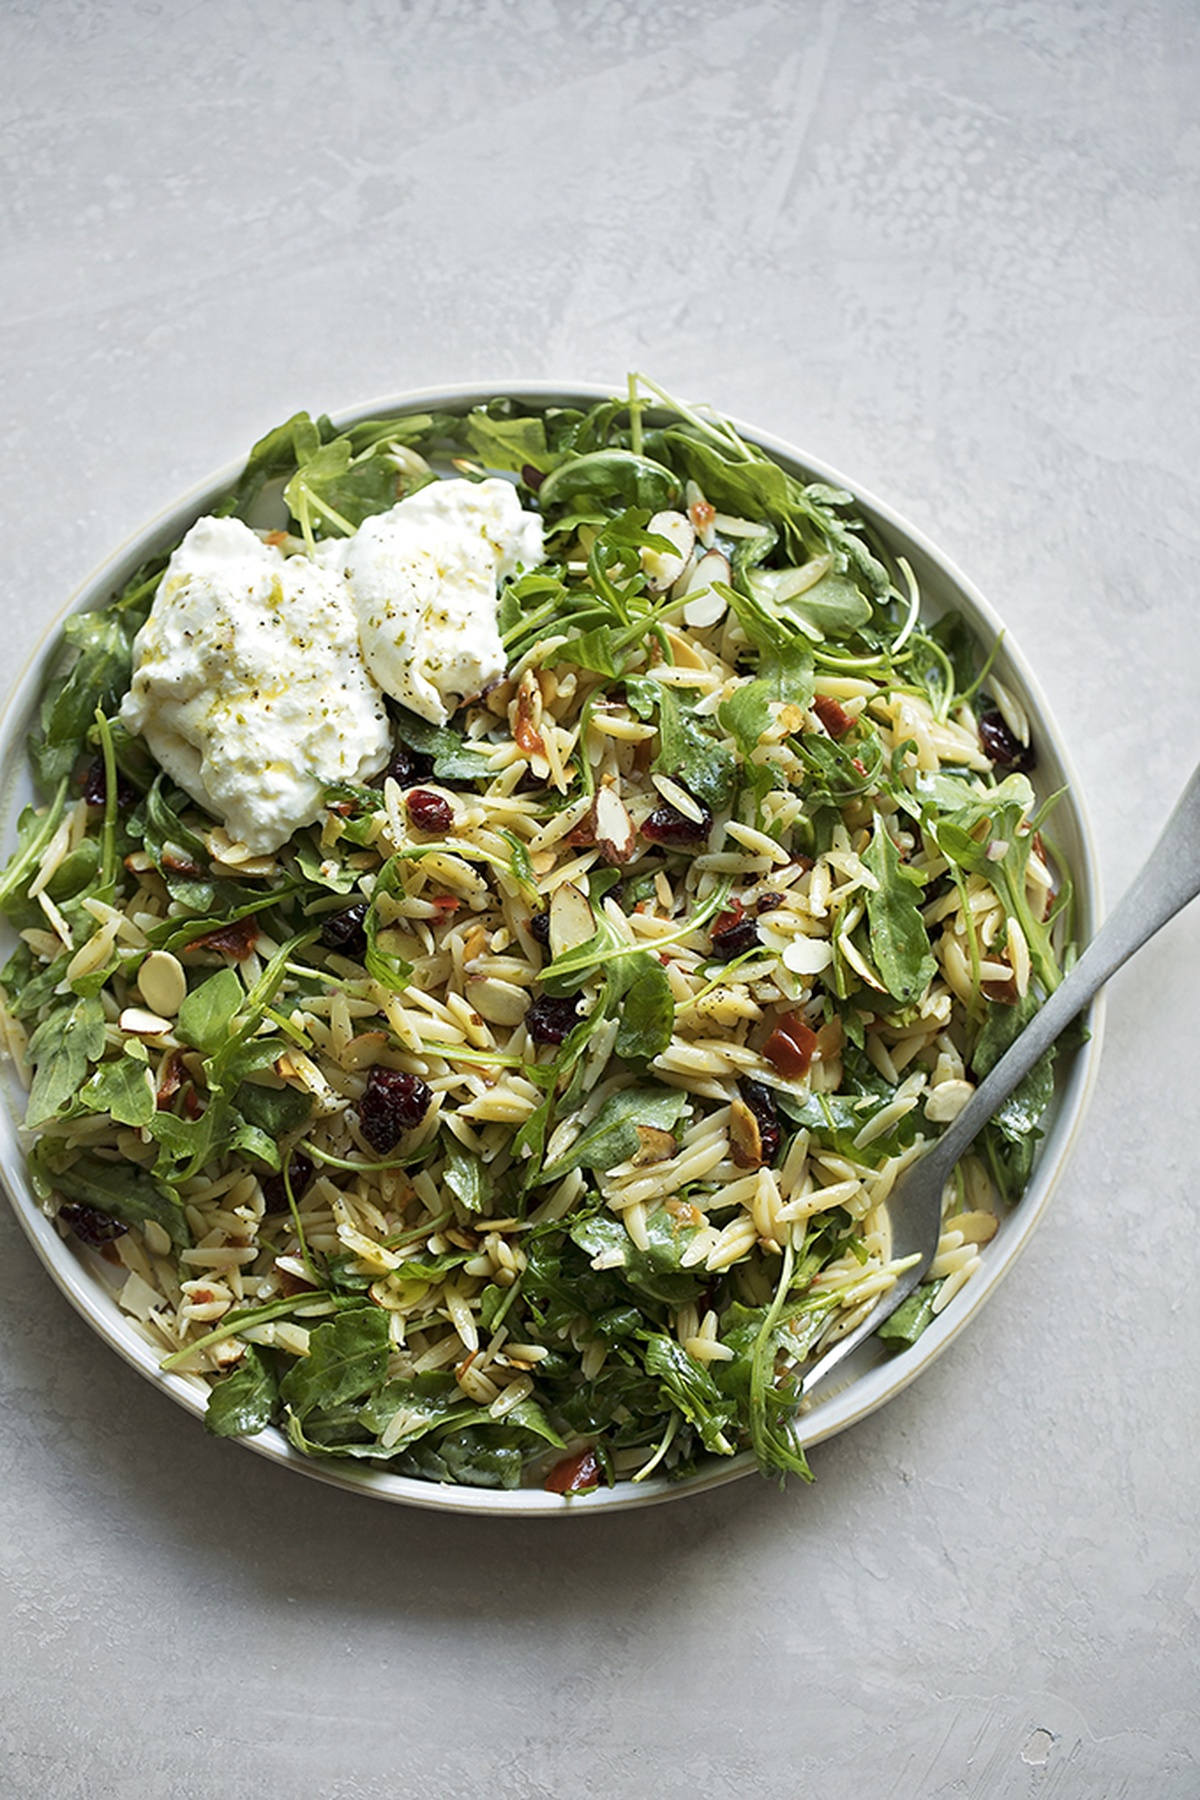 A serving bowl filled with a freshly prepared orzo and arugula salad.